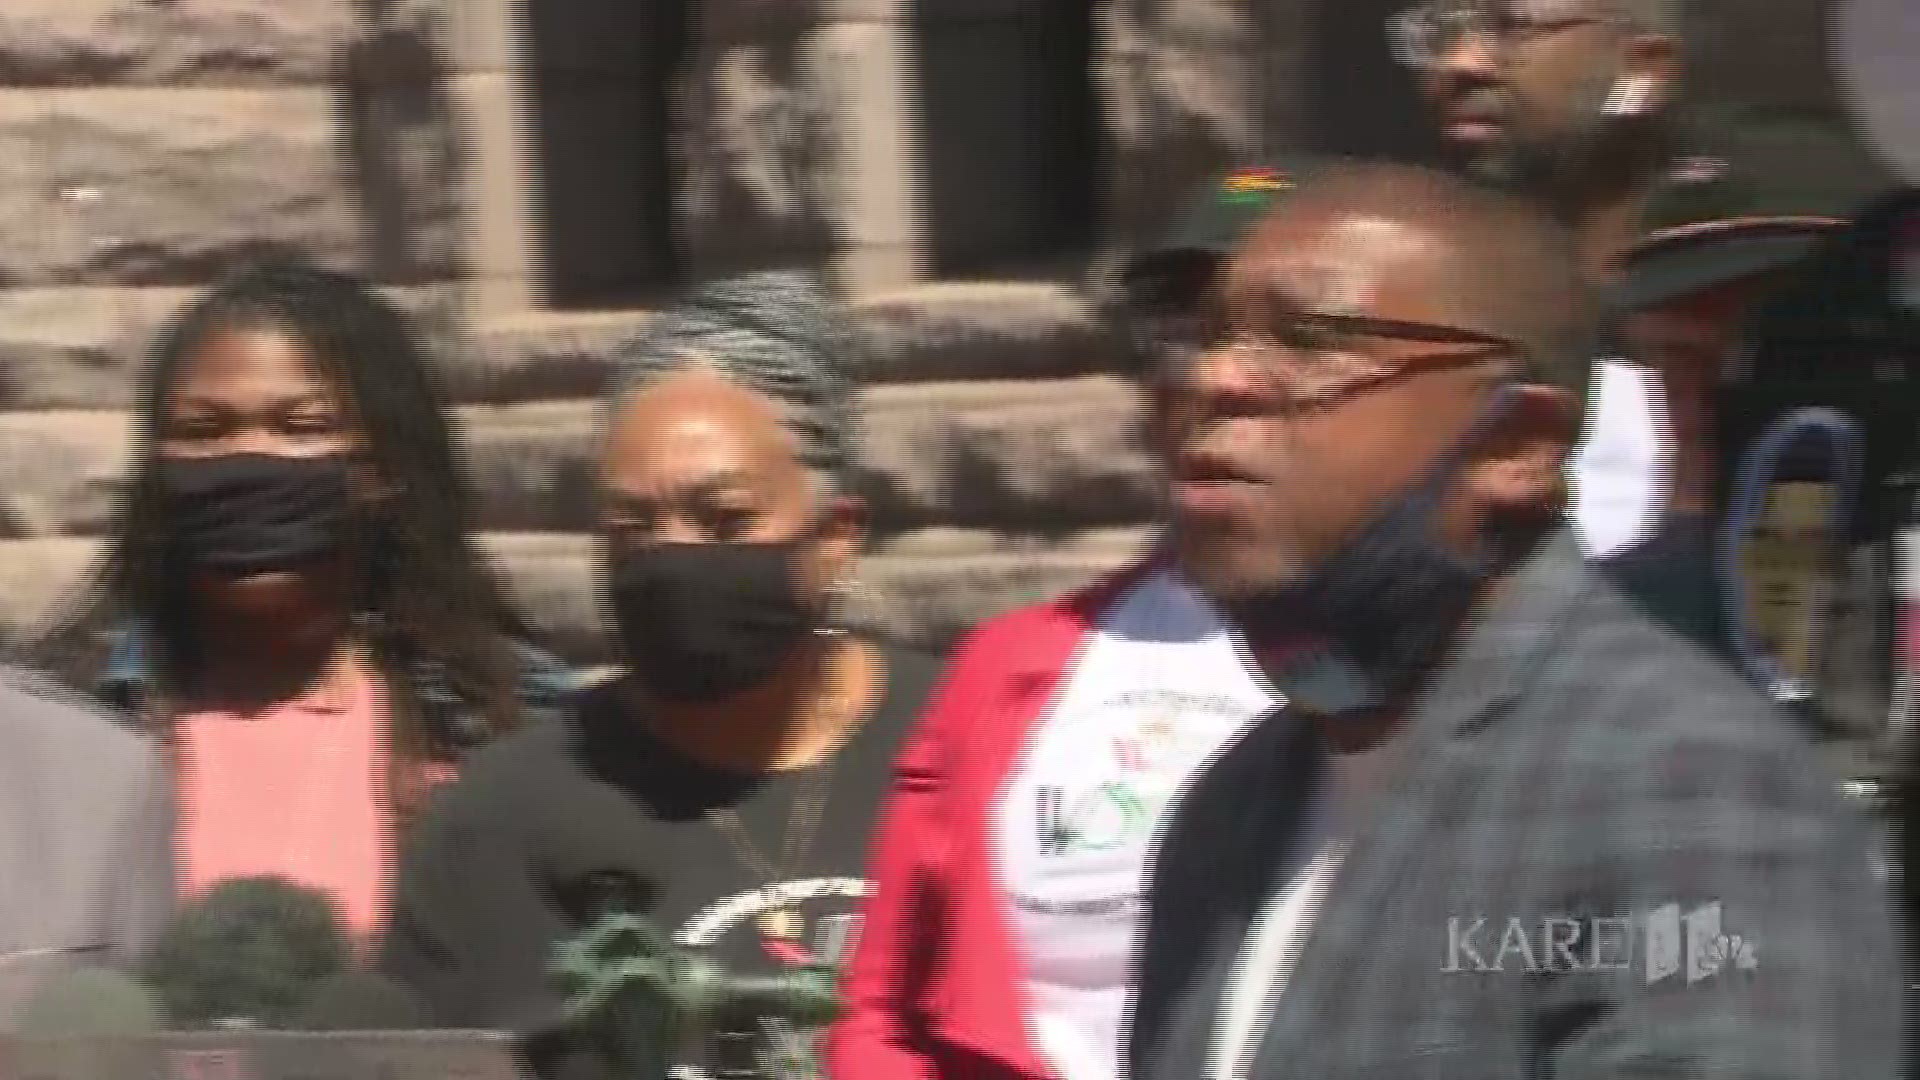 African American community leaders in Minneapolis gathered to show support for Police Chief Medaria Arradondo and to demand a voice in police reform talks.